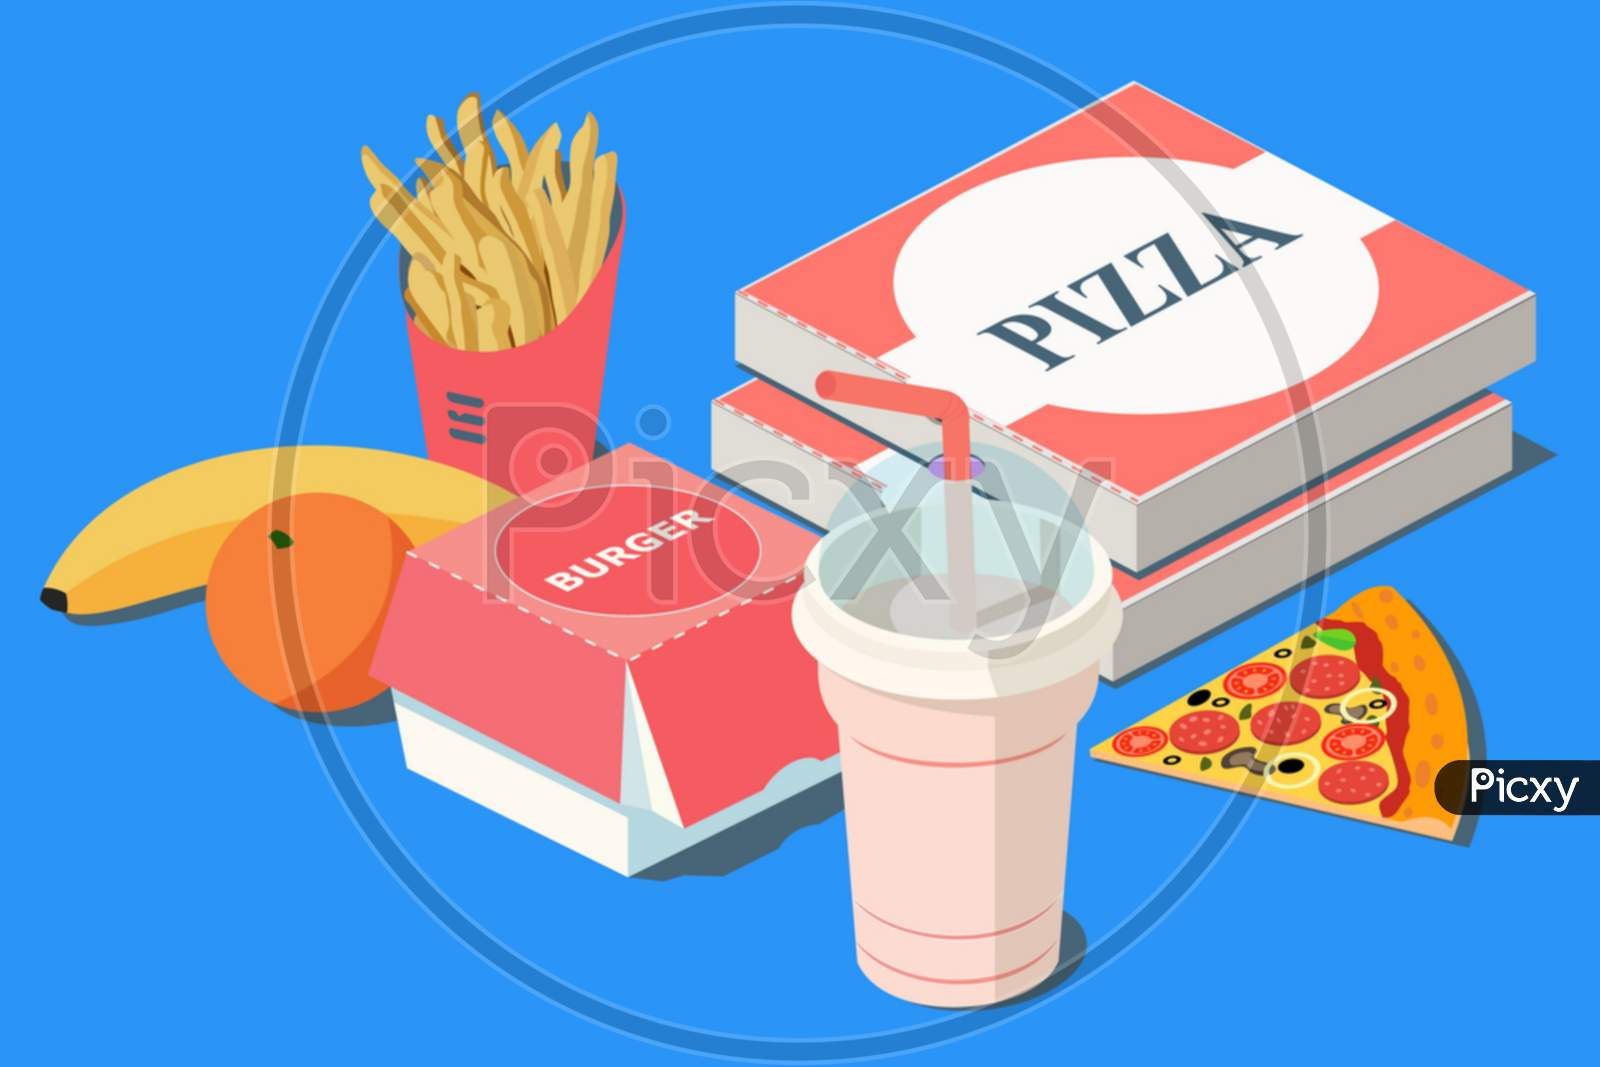 Fast Food. Burger, pizza and french fries in red carton package box, milkshake, banana, citrus orange on a blue background. 3D vector isometric illustration.